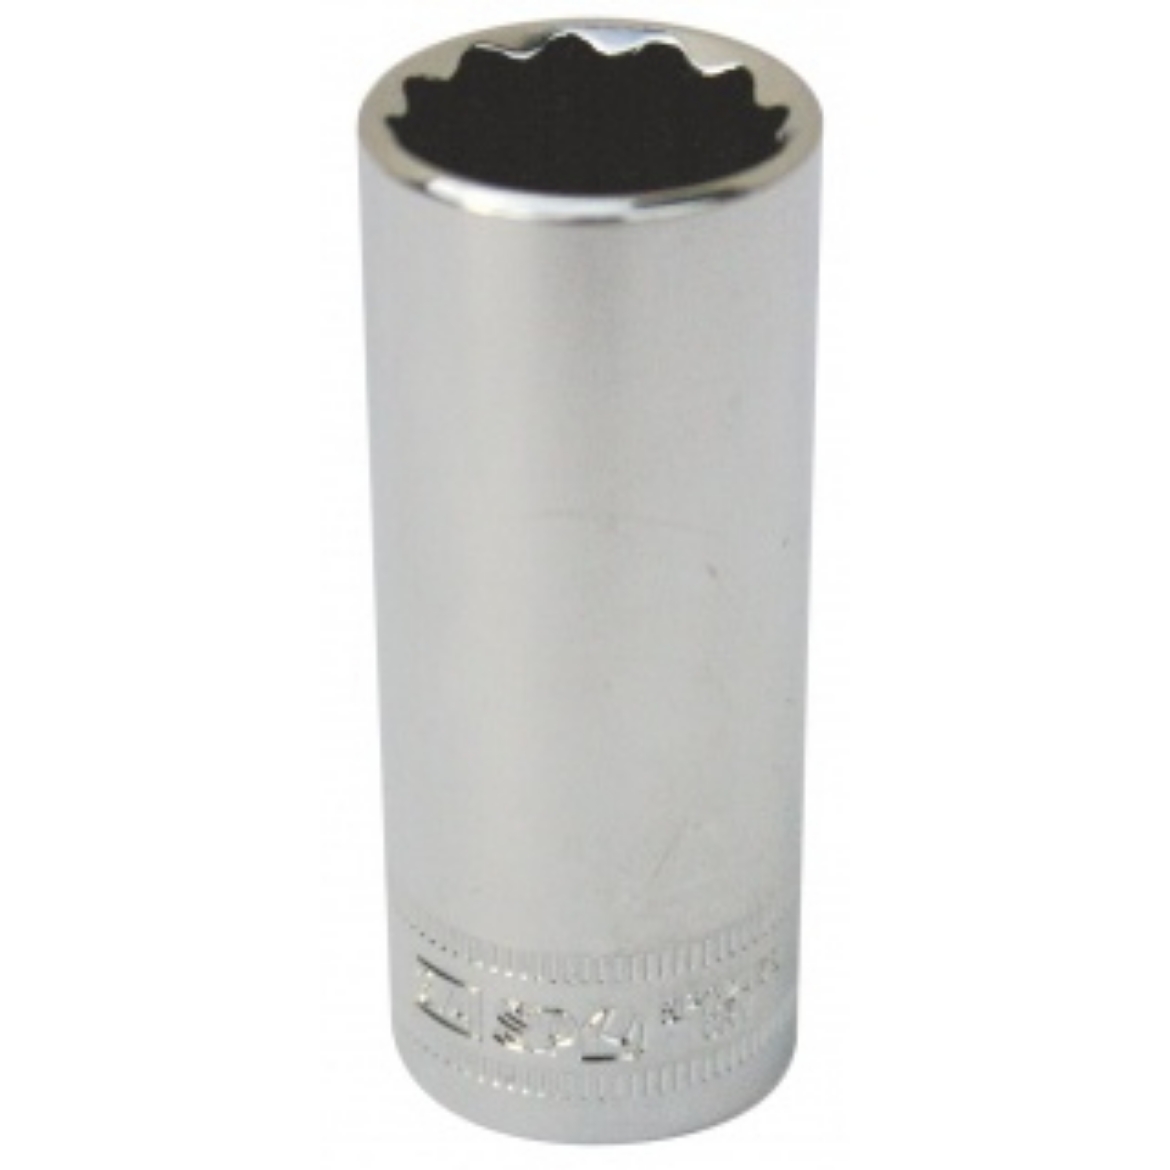 Picture of SOCKET DEEP 3/8"DR 12PT METRIC 14MM SP TOOLS